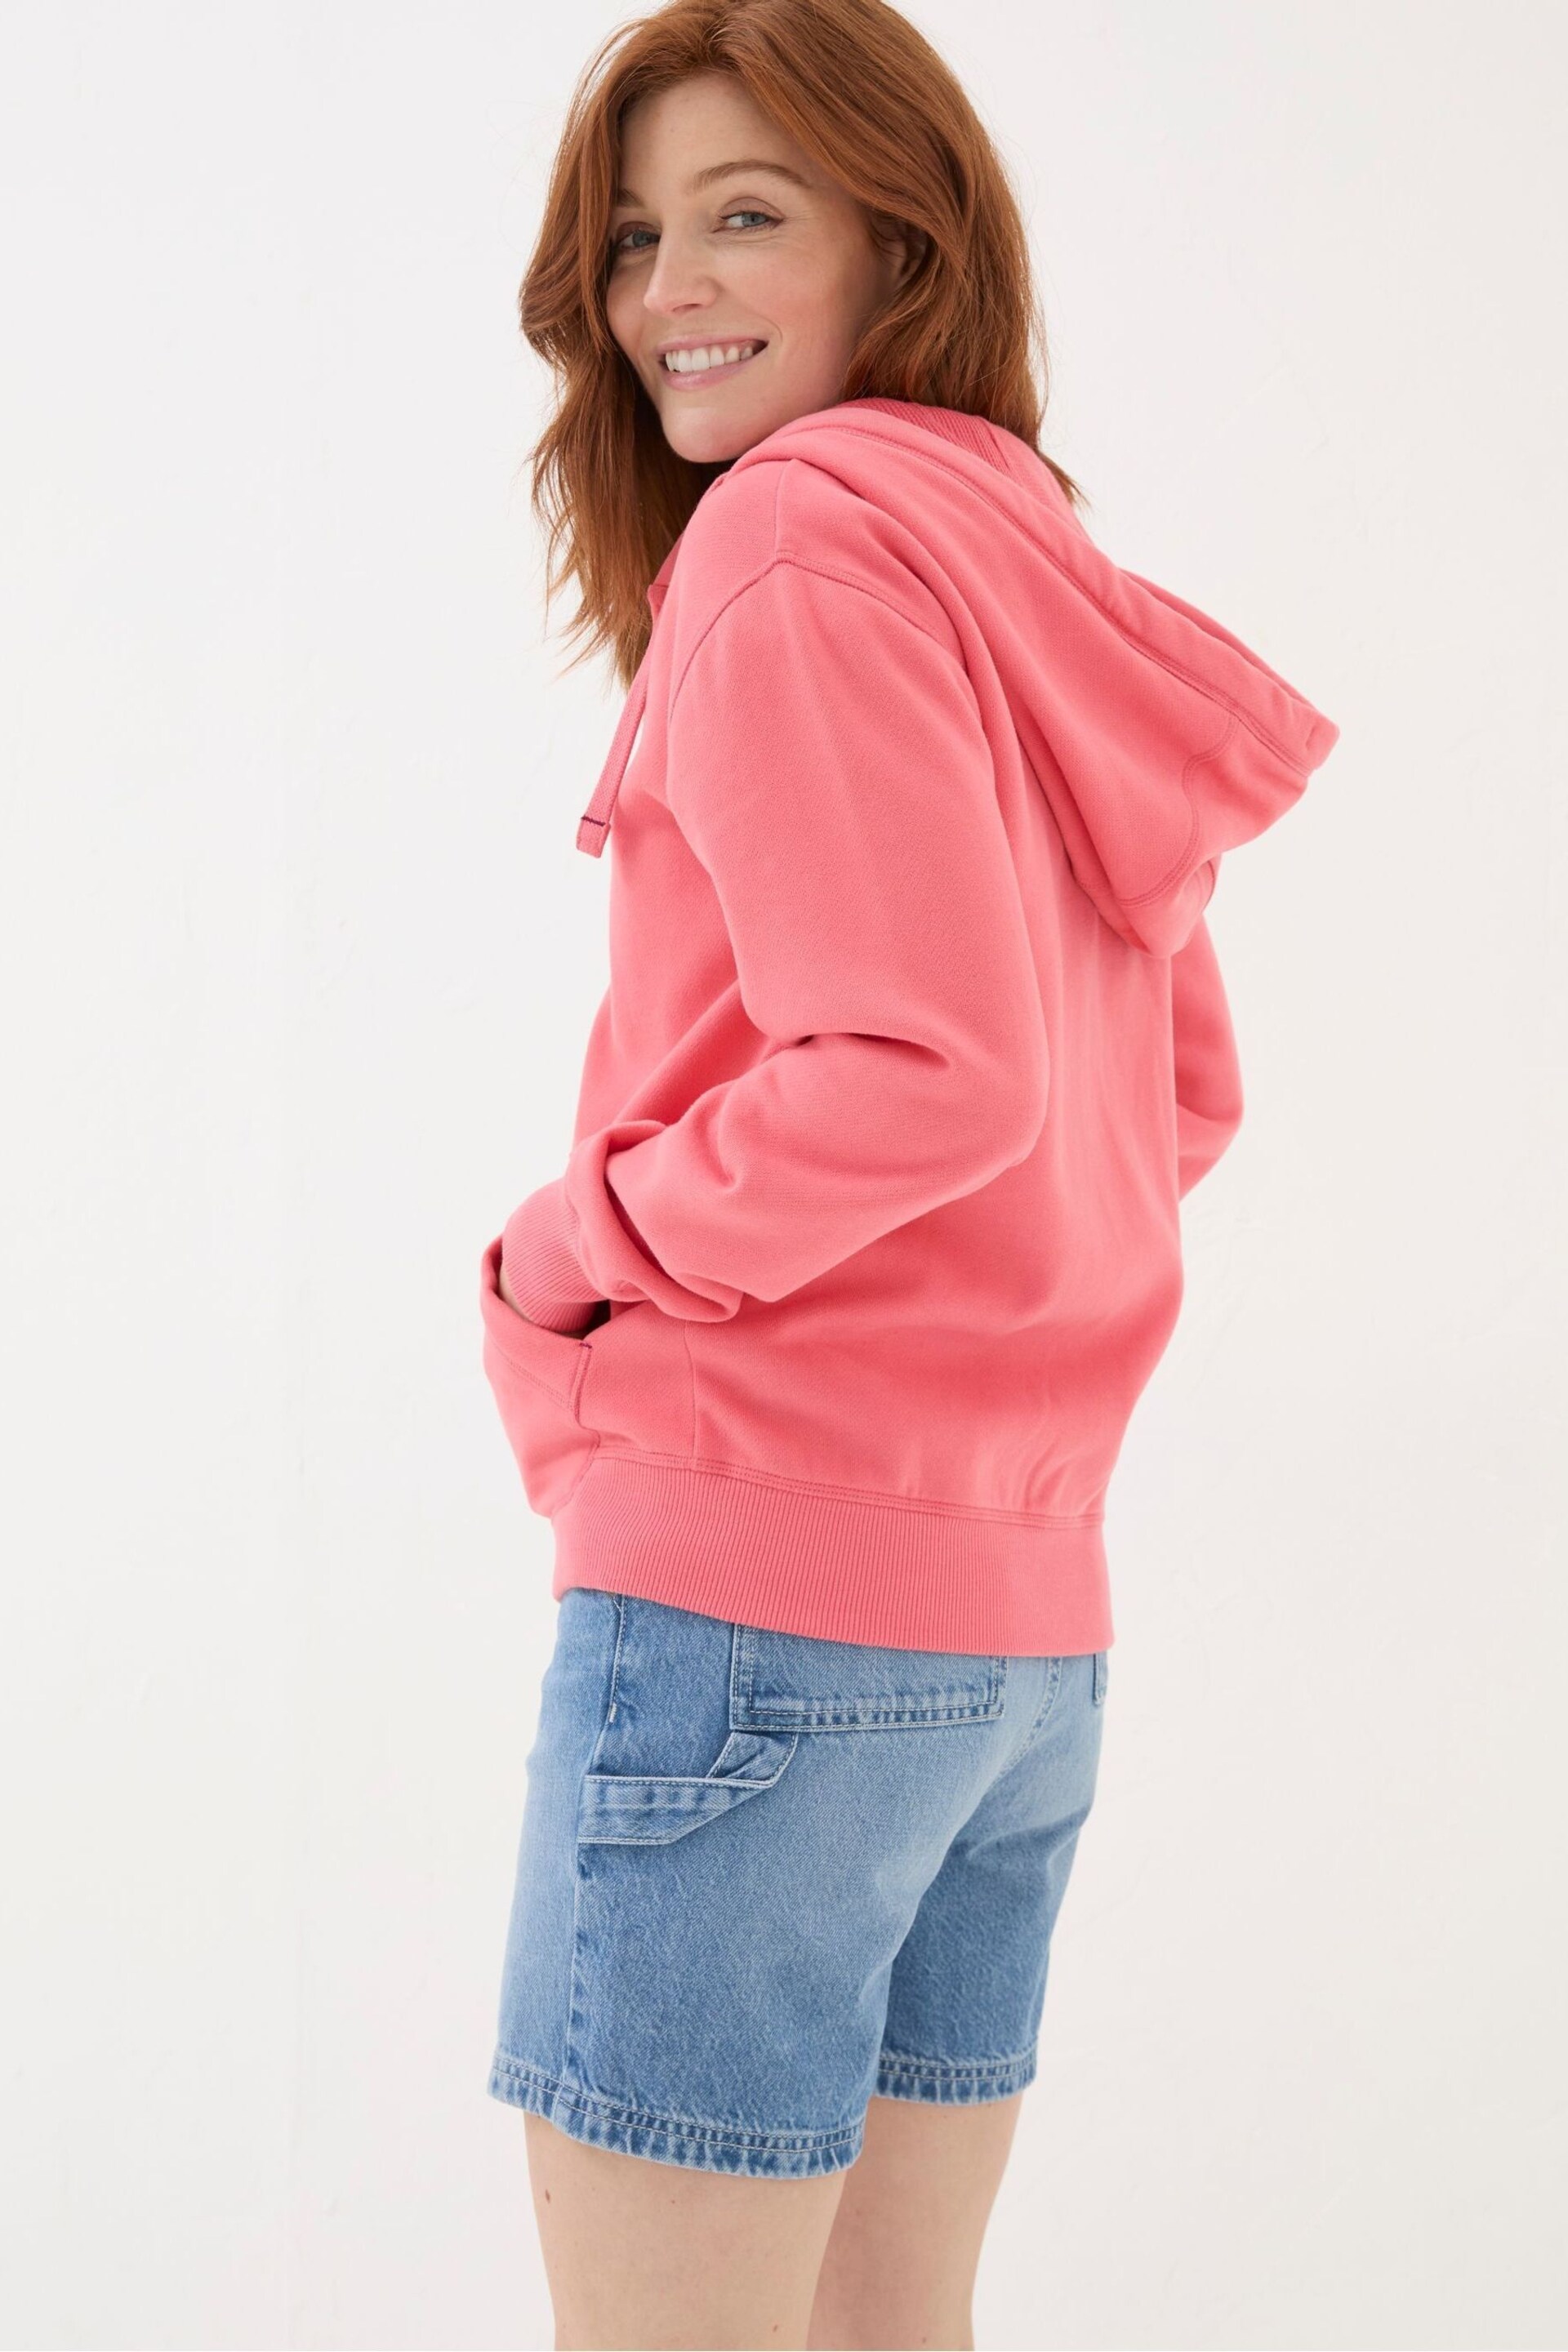 FatFace Pink Zip Through Hoodie - Image 2 of 5